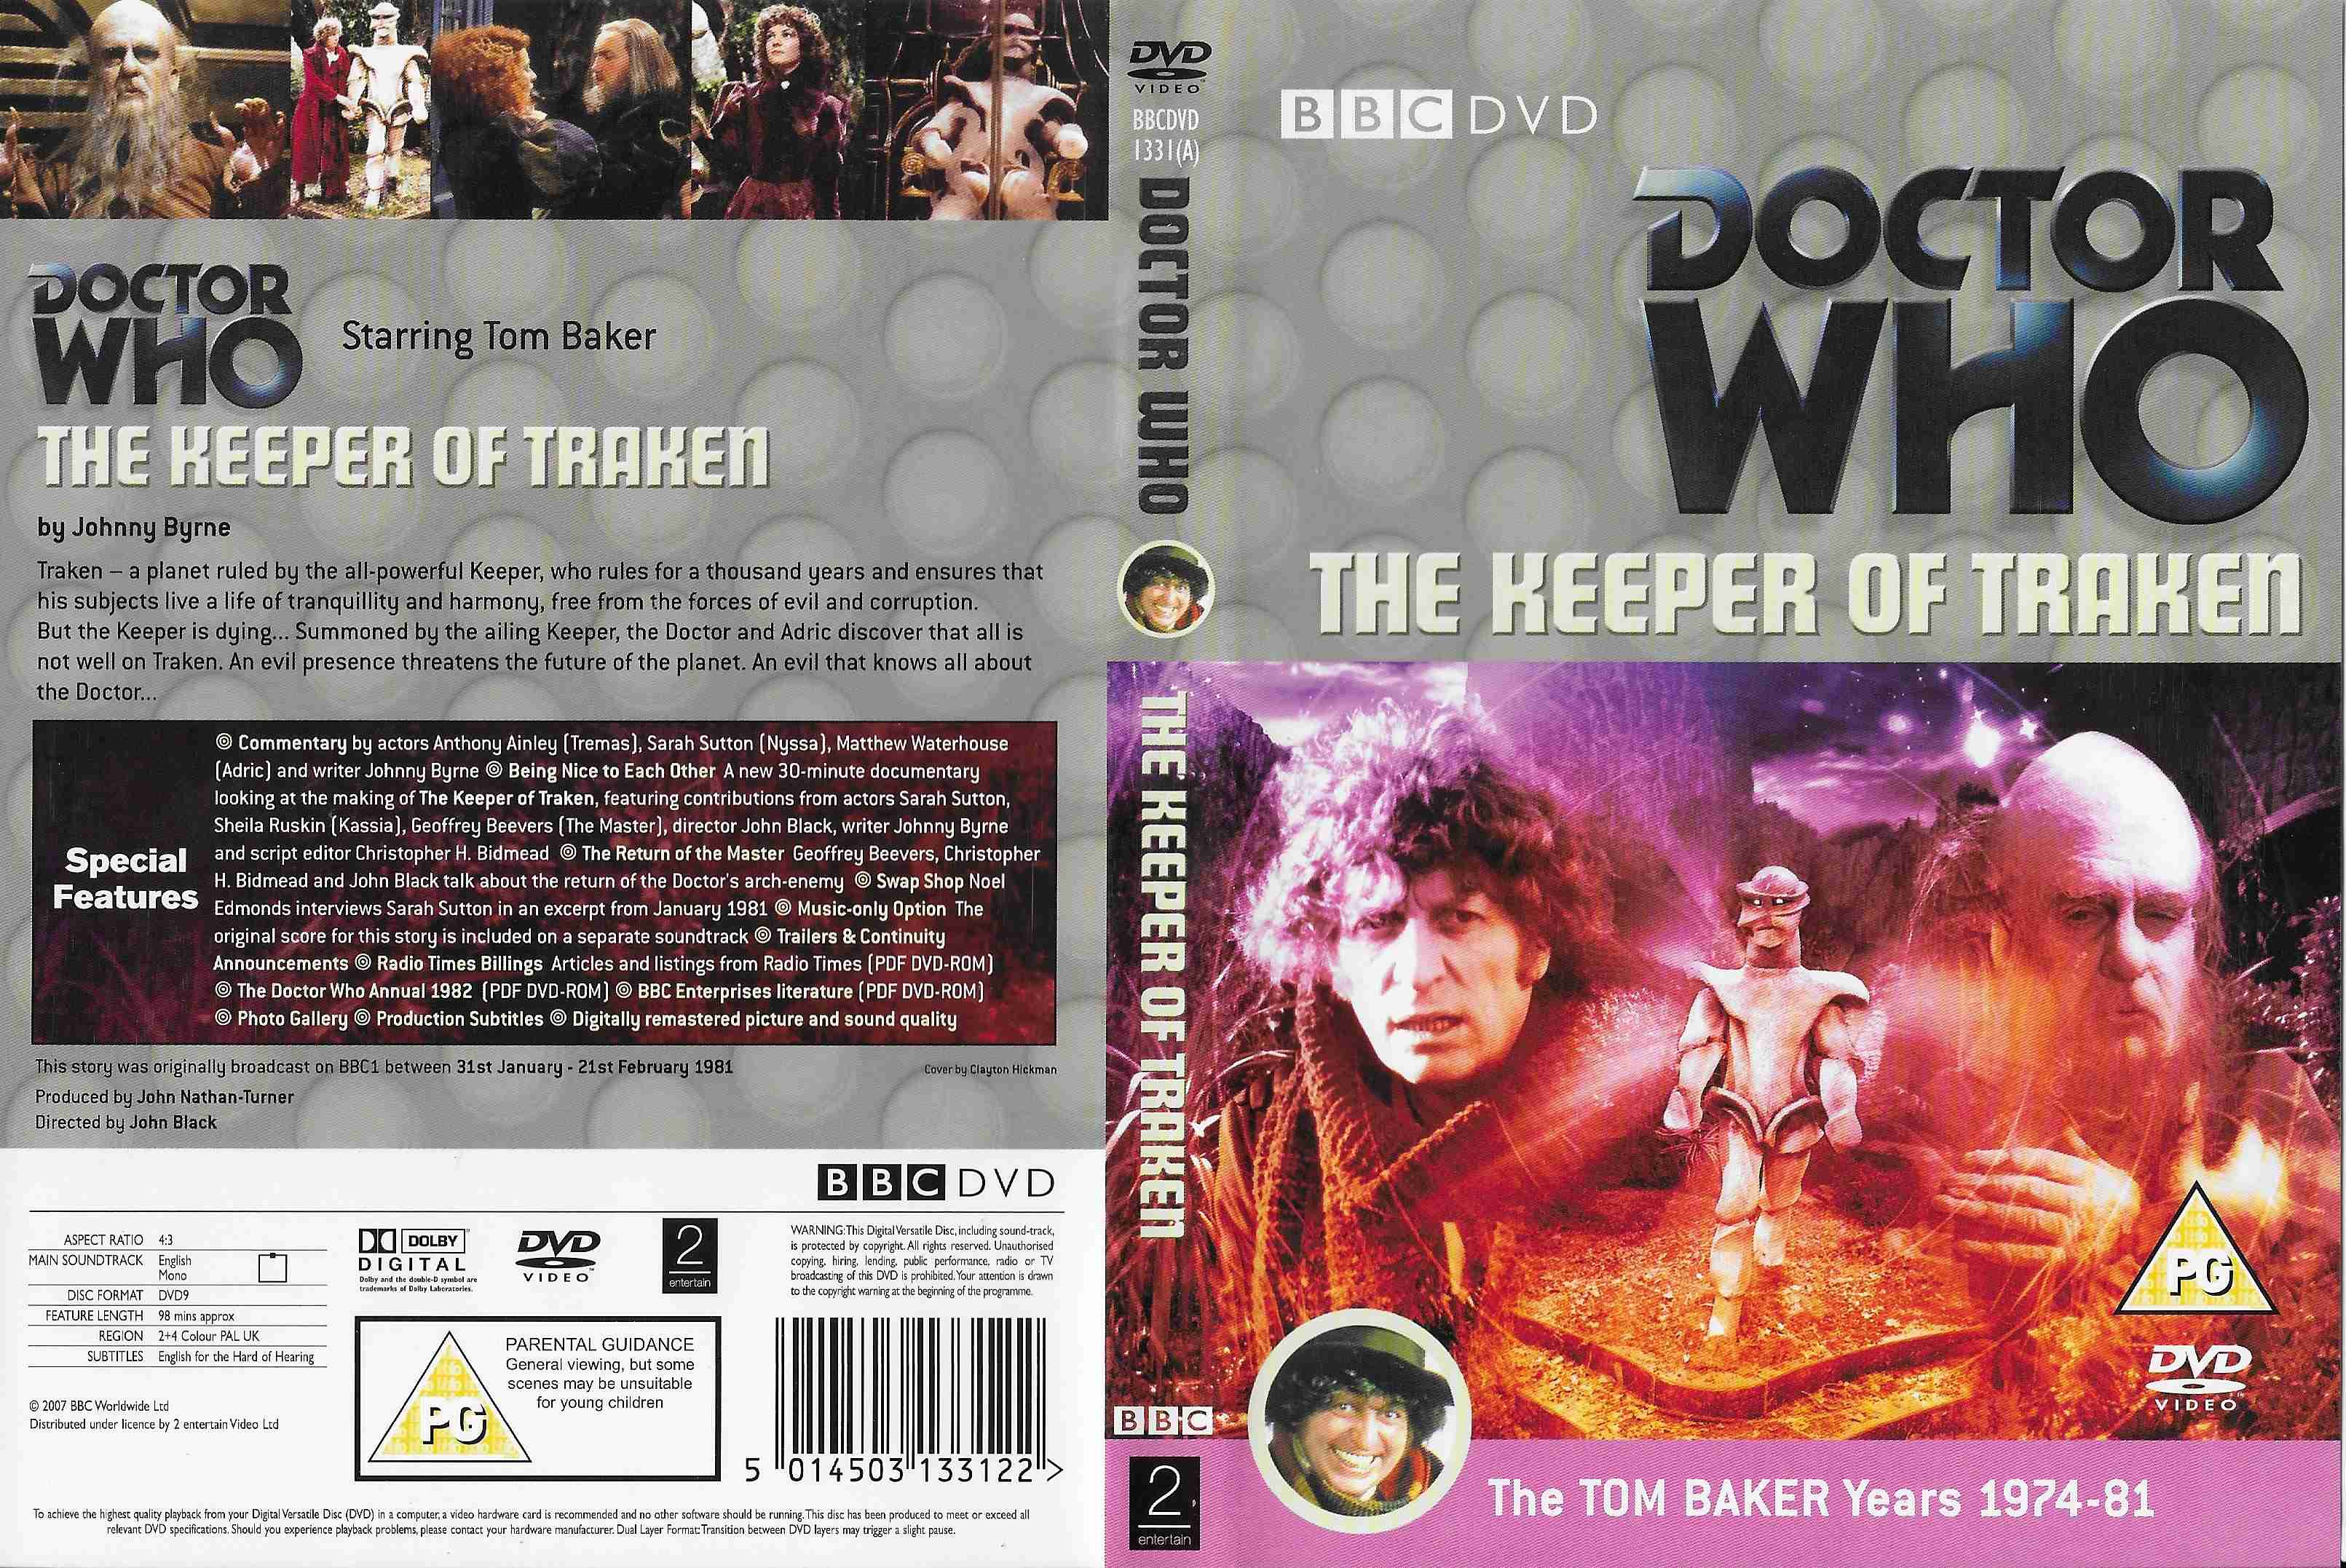 Back cover of BBCDVD 1331A